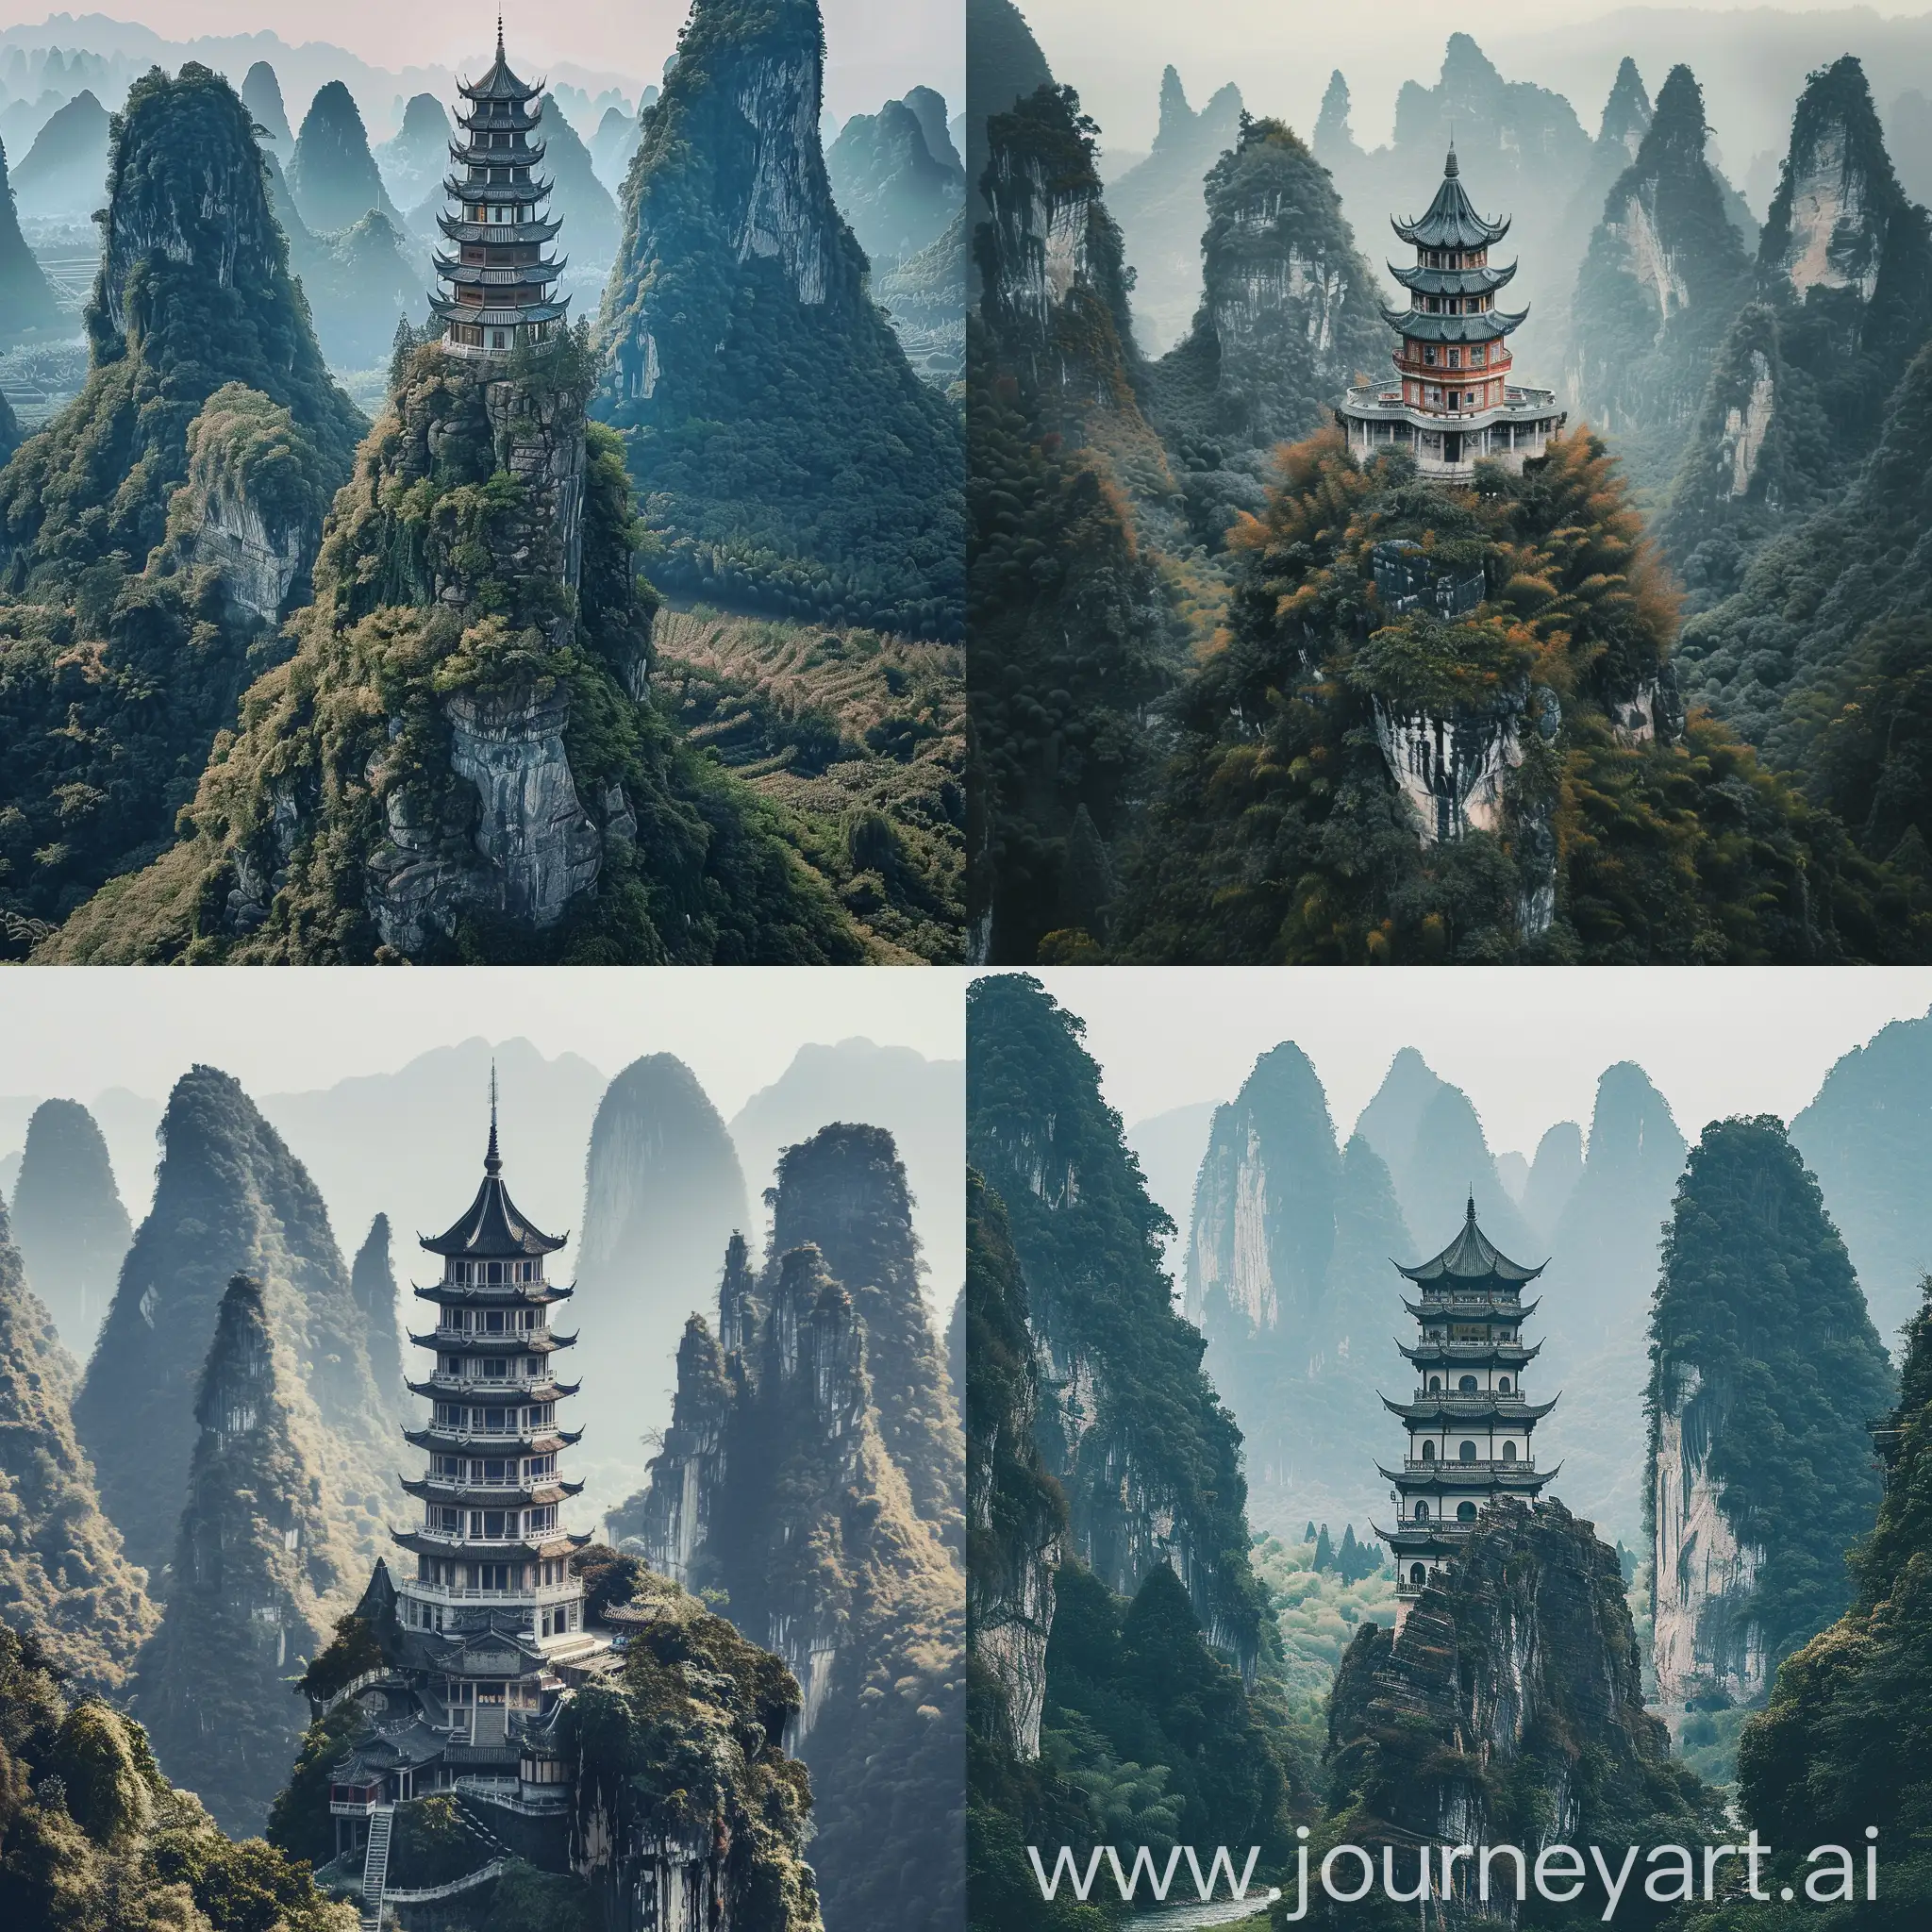 a large pagoda -like building on a tall mountain (like the mountains in yangshuo) surrounded by other tall mountains